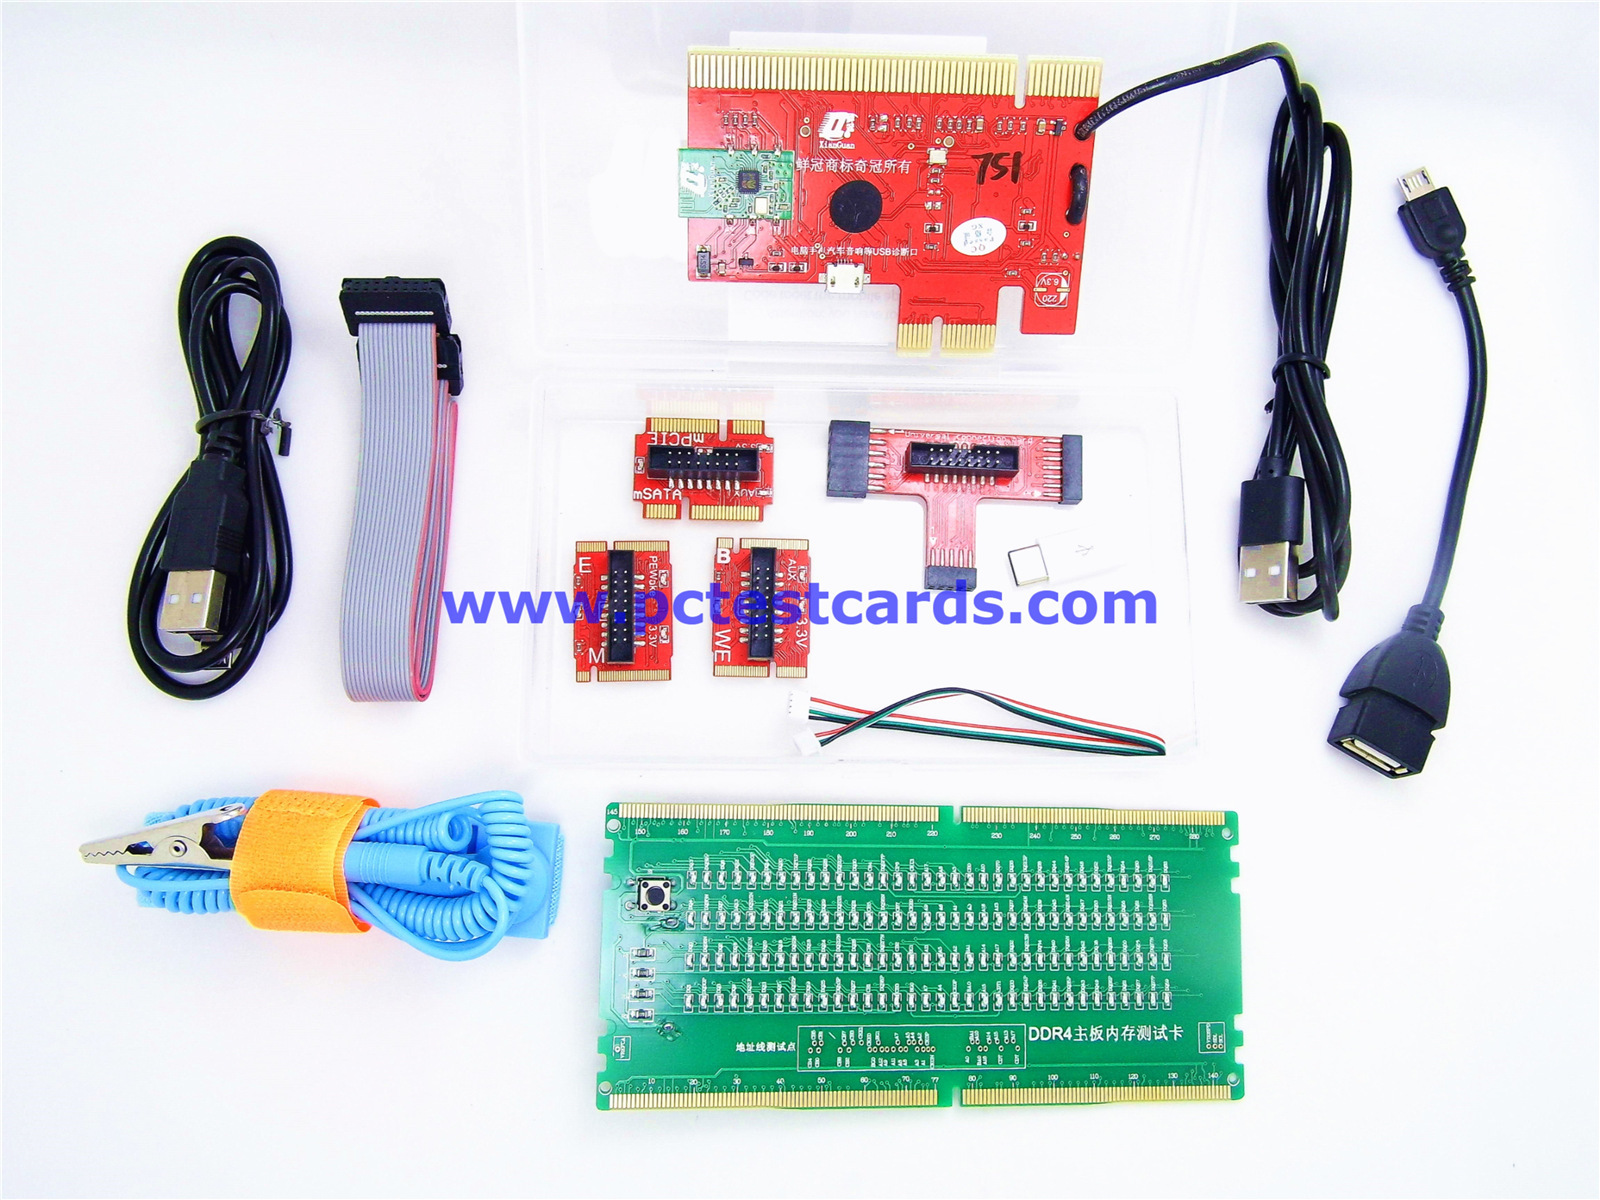 New Complete PC Laptop Computer Android Motherboard and DDR4 RAM Slot Diagnostic Repair Test Cards Pro Kit